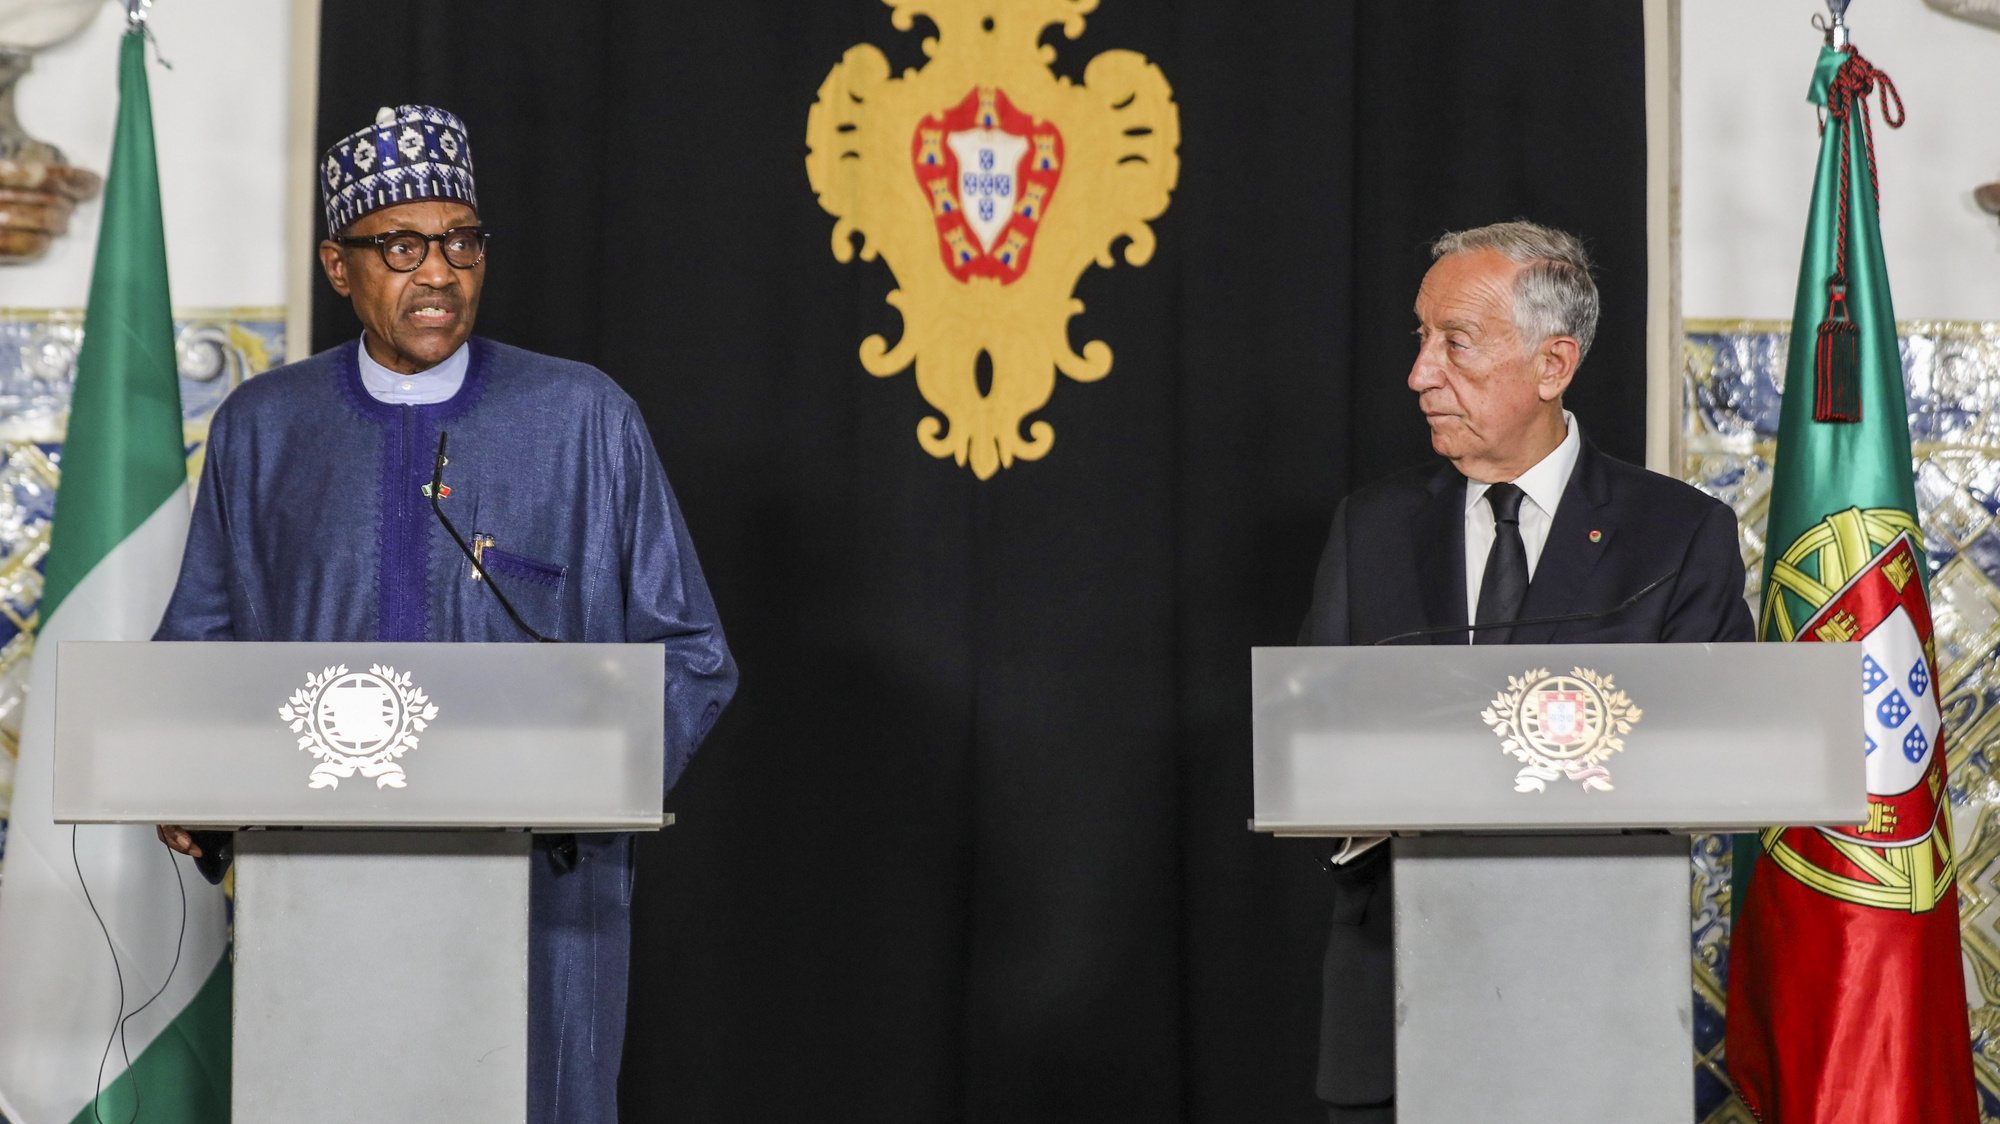 Portugal&#039;s President Marcelo Rebelo de Sousa (R) and the Nigeria&#039;s President Muhammadu Buhari (L) attend a press conference after a meeting at Belem Palace in Lisbon, Portugal, 30 June 2022. MIGUEL A. LOPES/LUSA